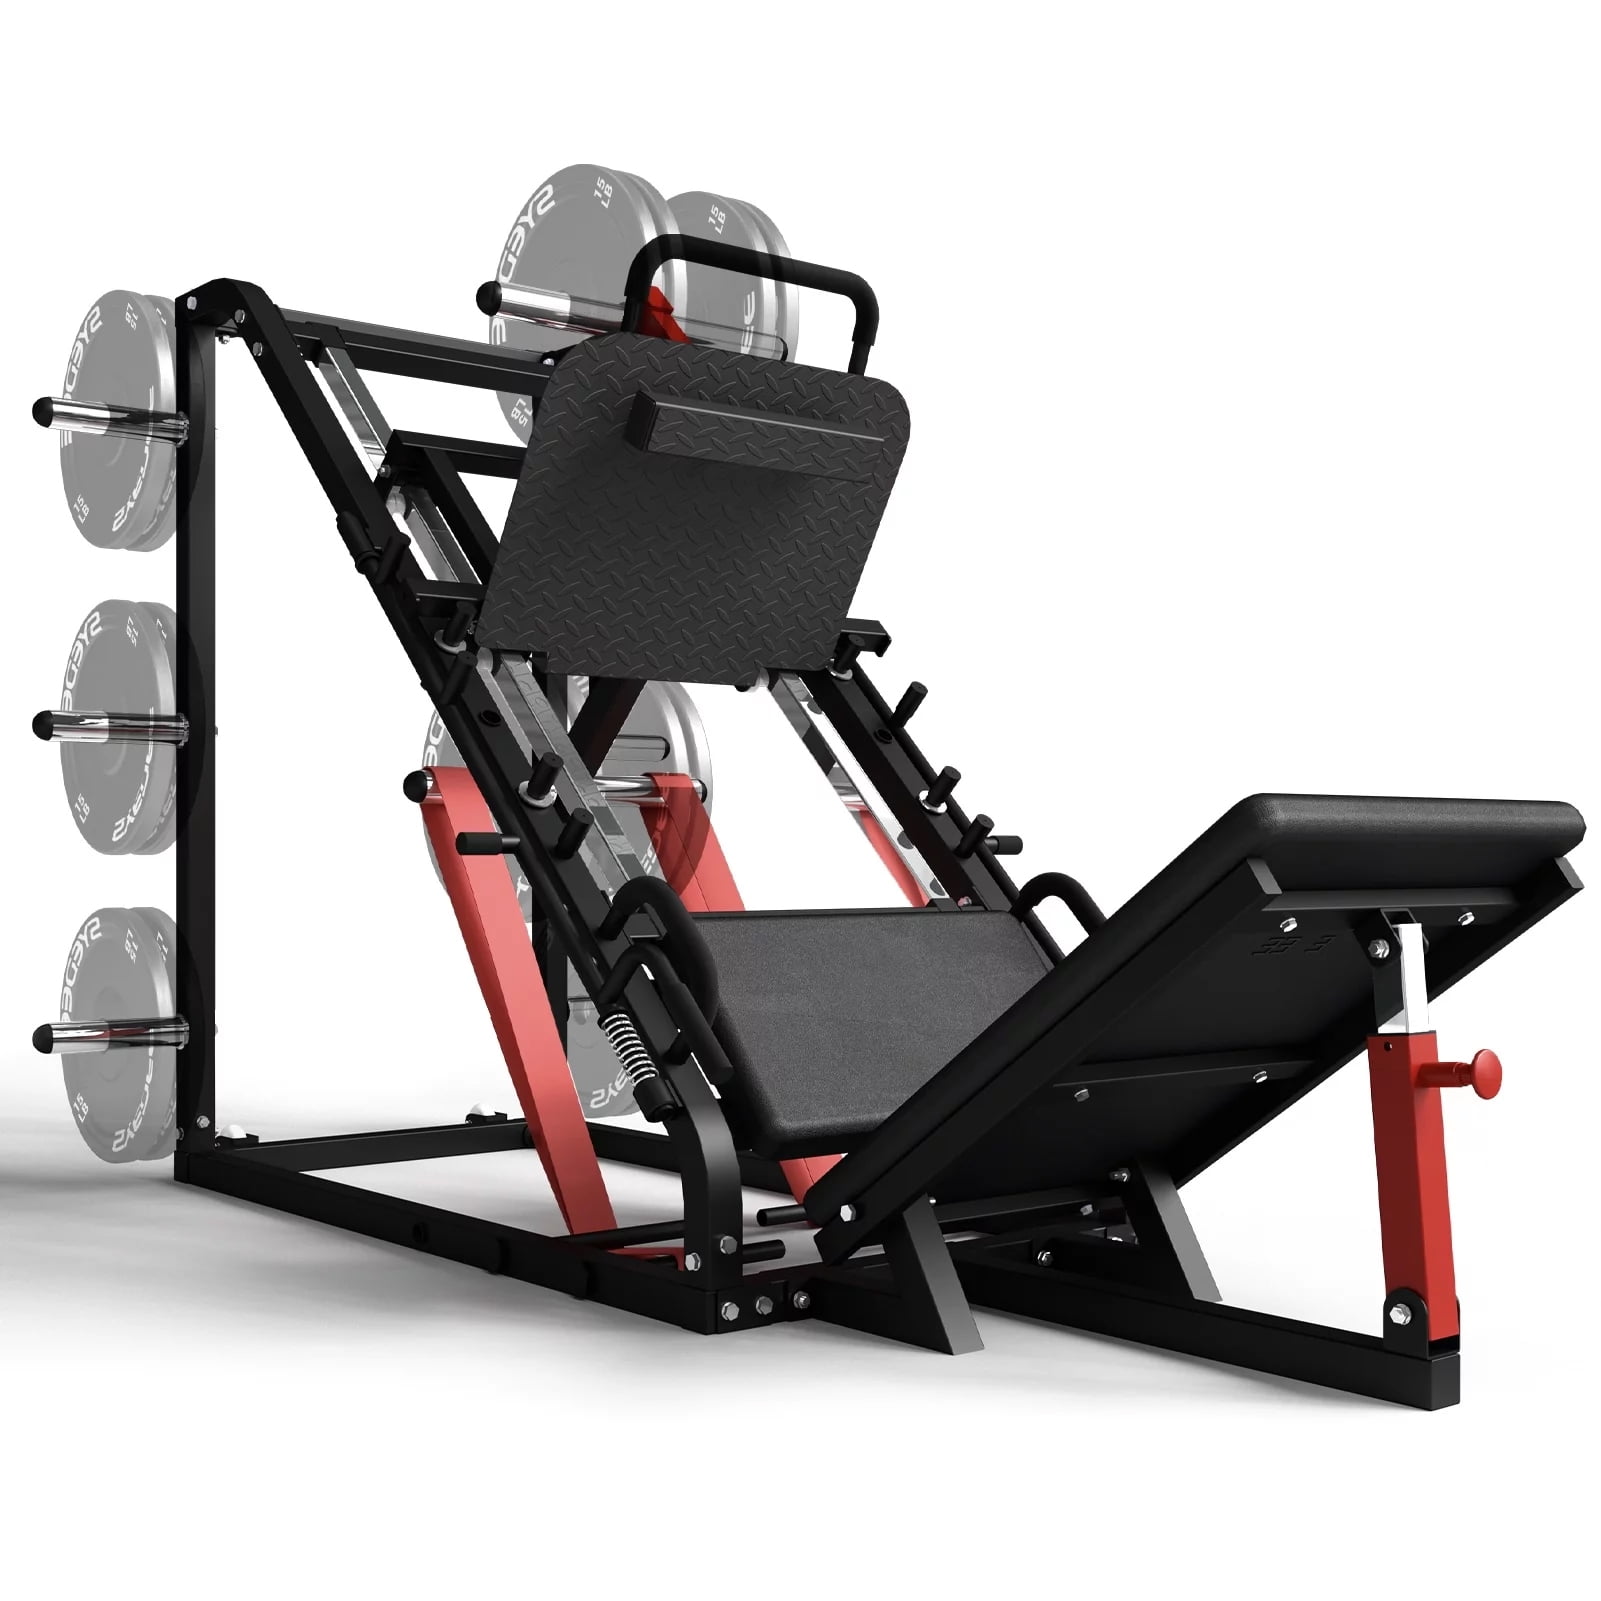 How To Do Leg Press with Resistance Band